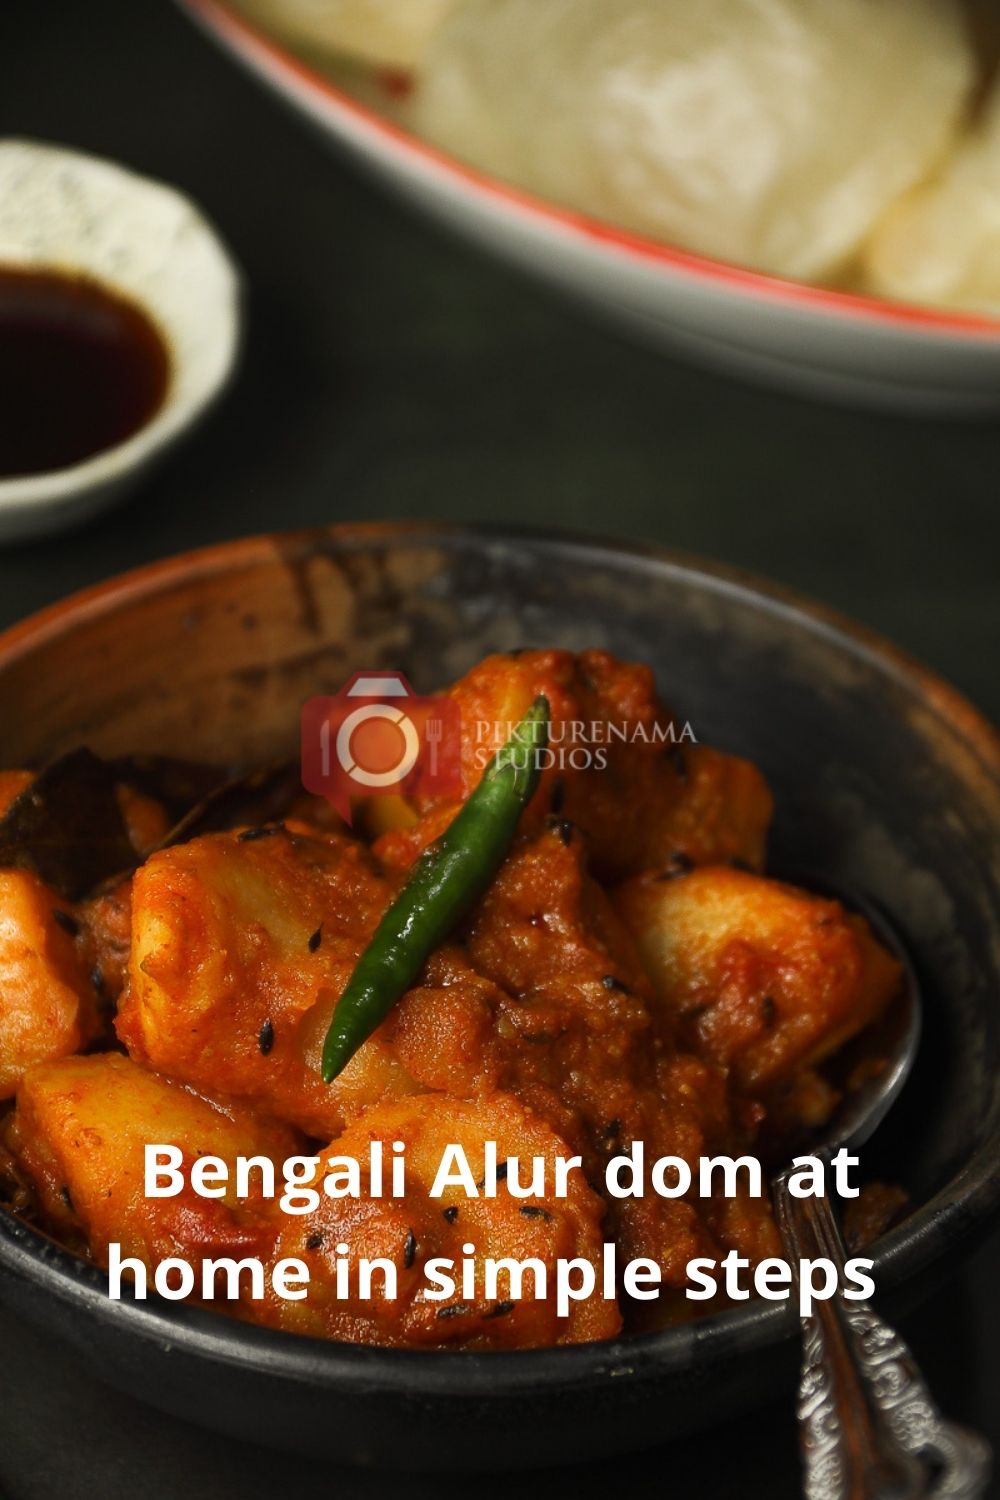 Easy way to make bengali Aloo Dum at home for Pinterest - 1